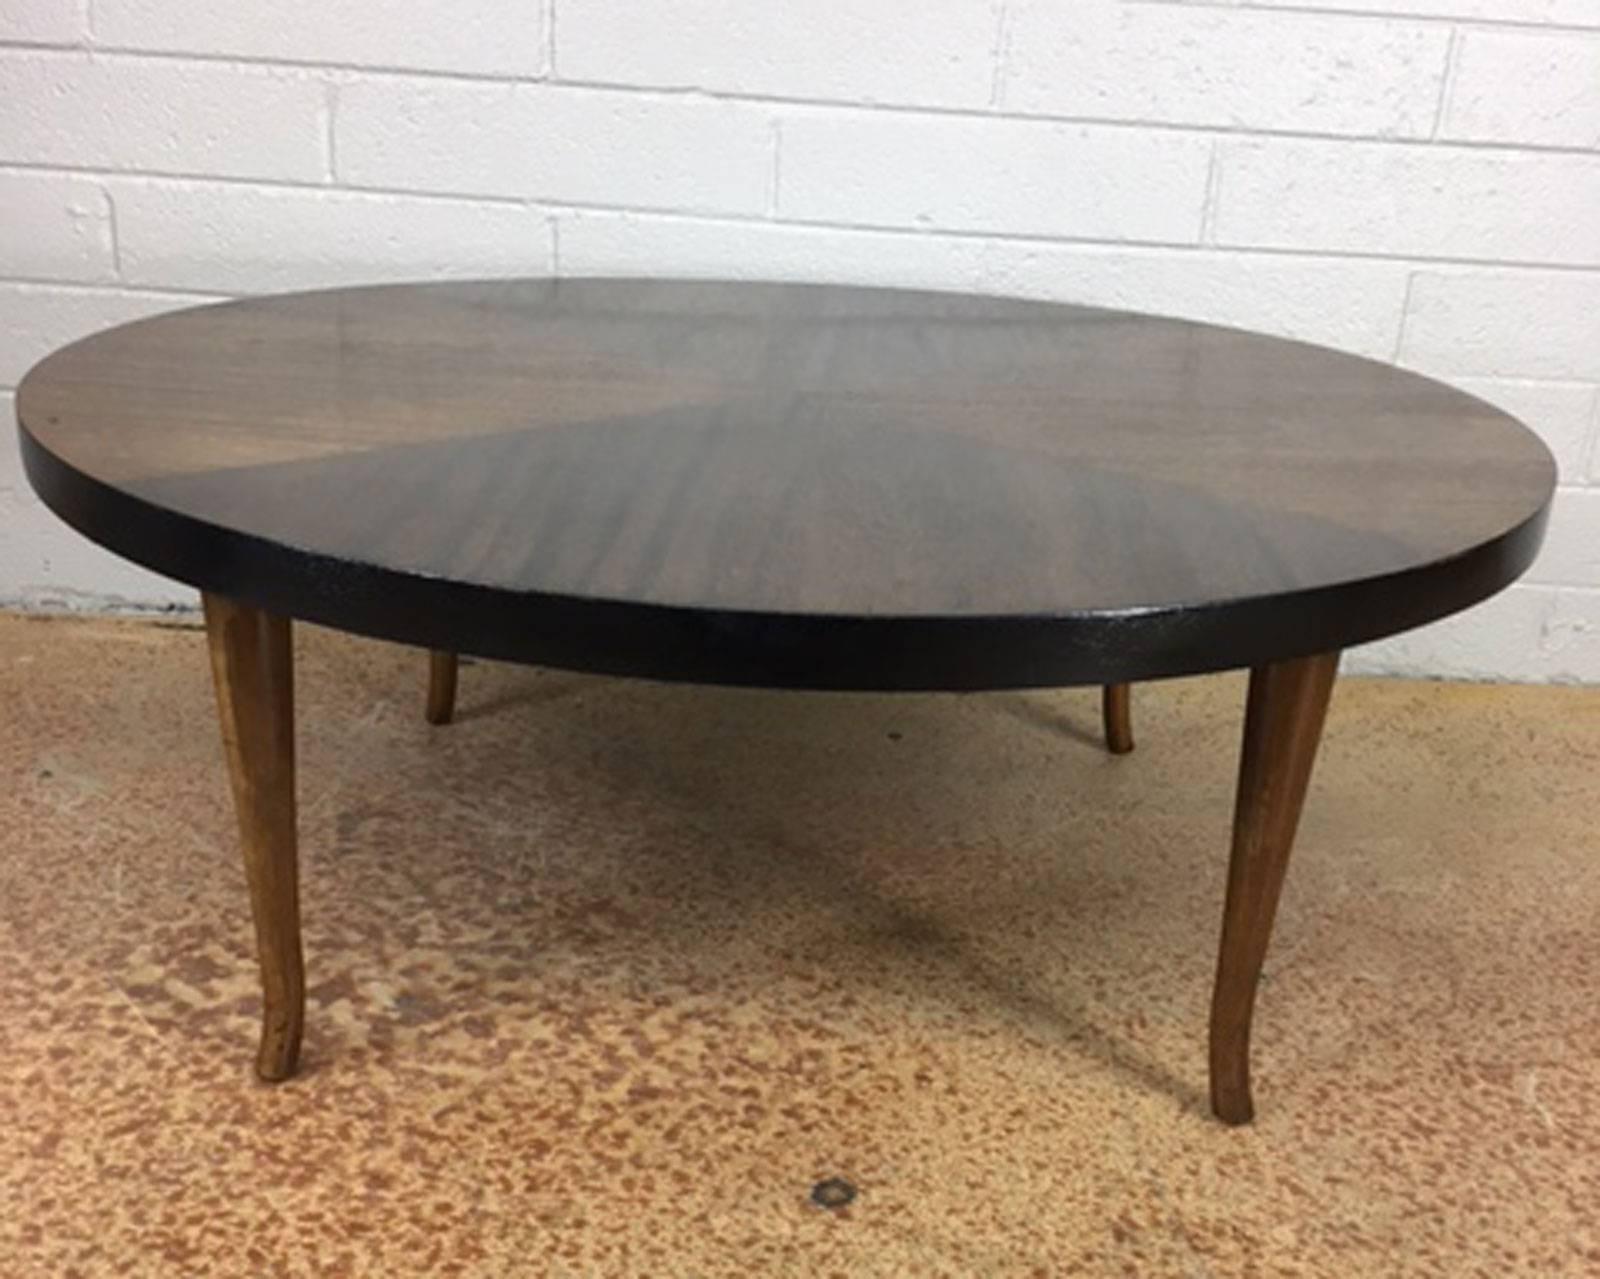 Walnut and mahogany round coffee table with a patterned inset top. Maker unknown. Refinished.